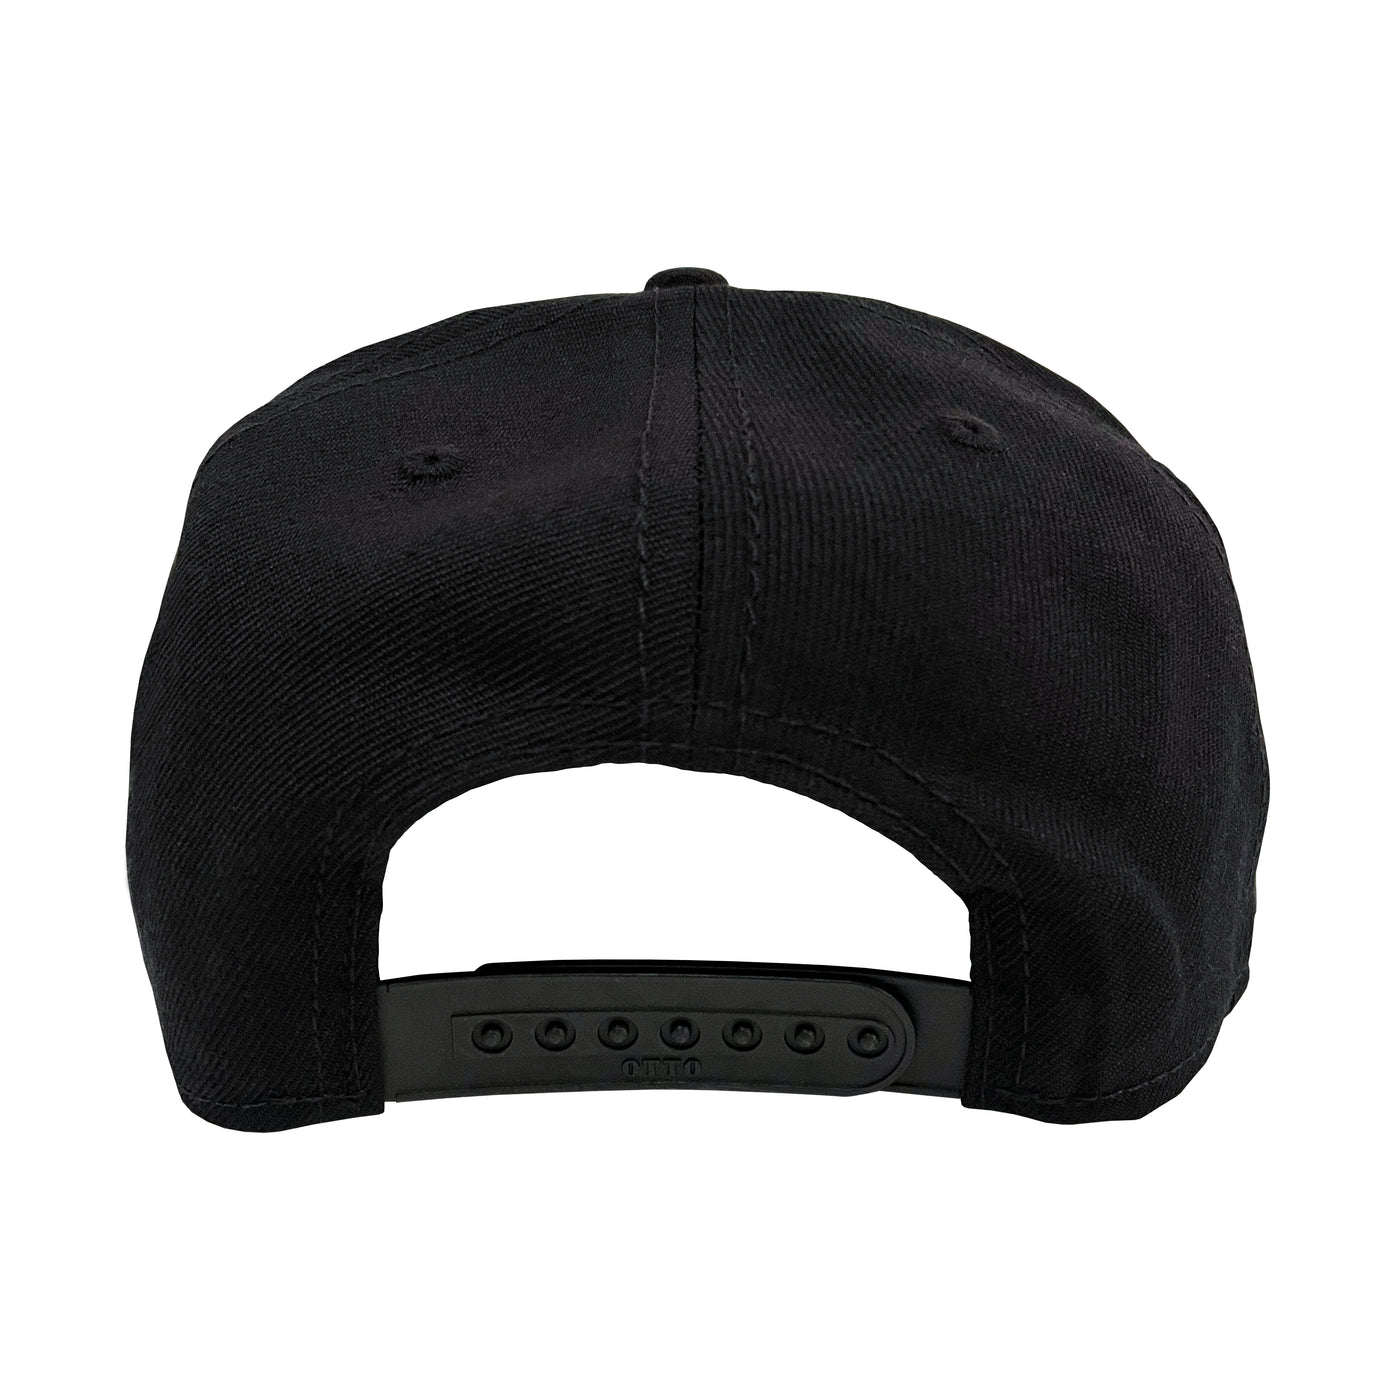 Rear view of the black Freeboard Hat